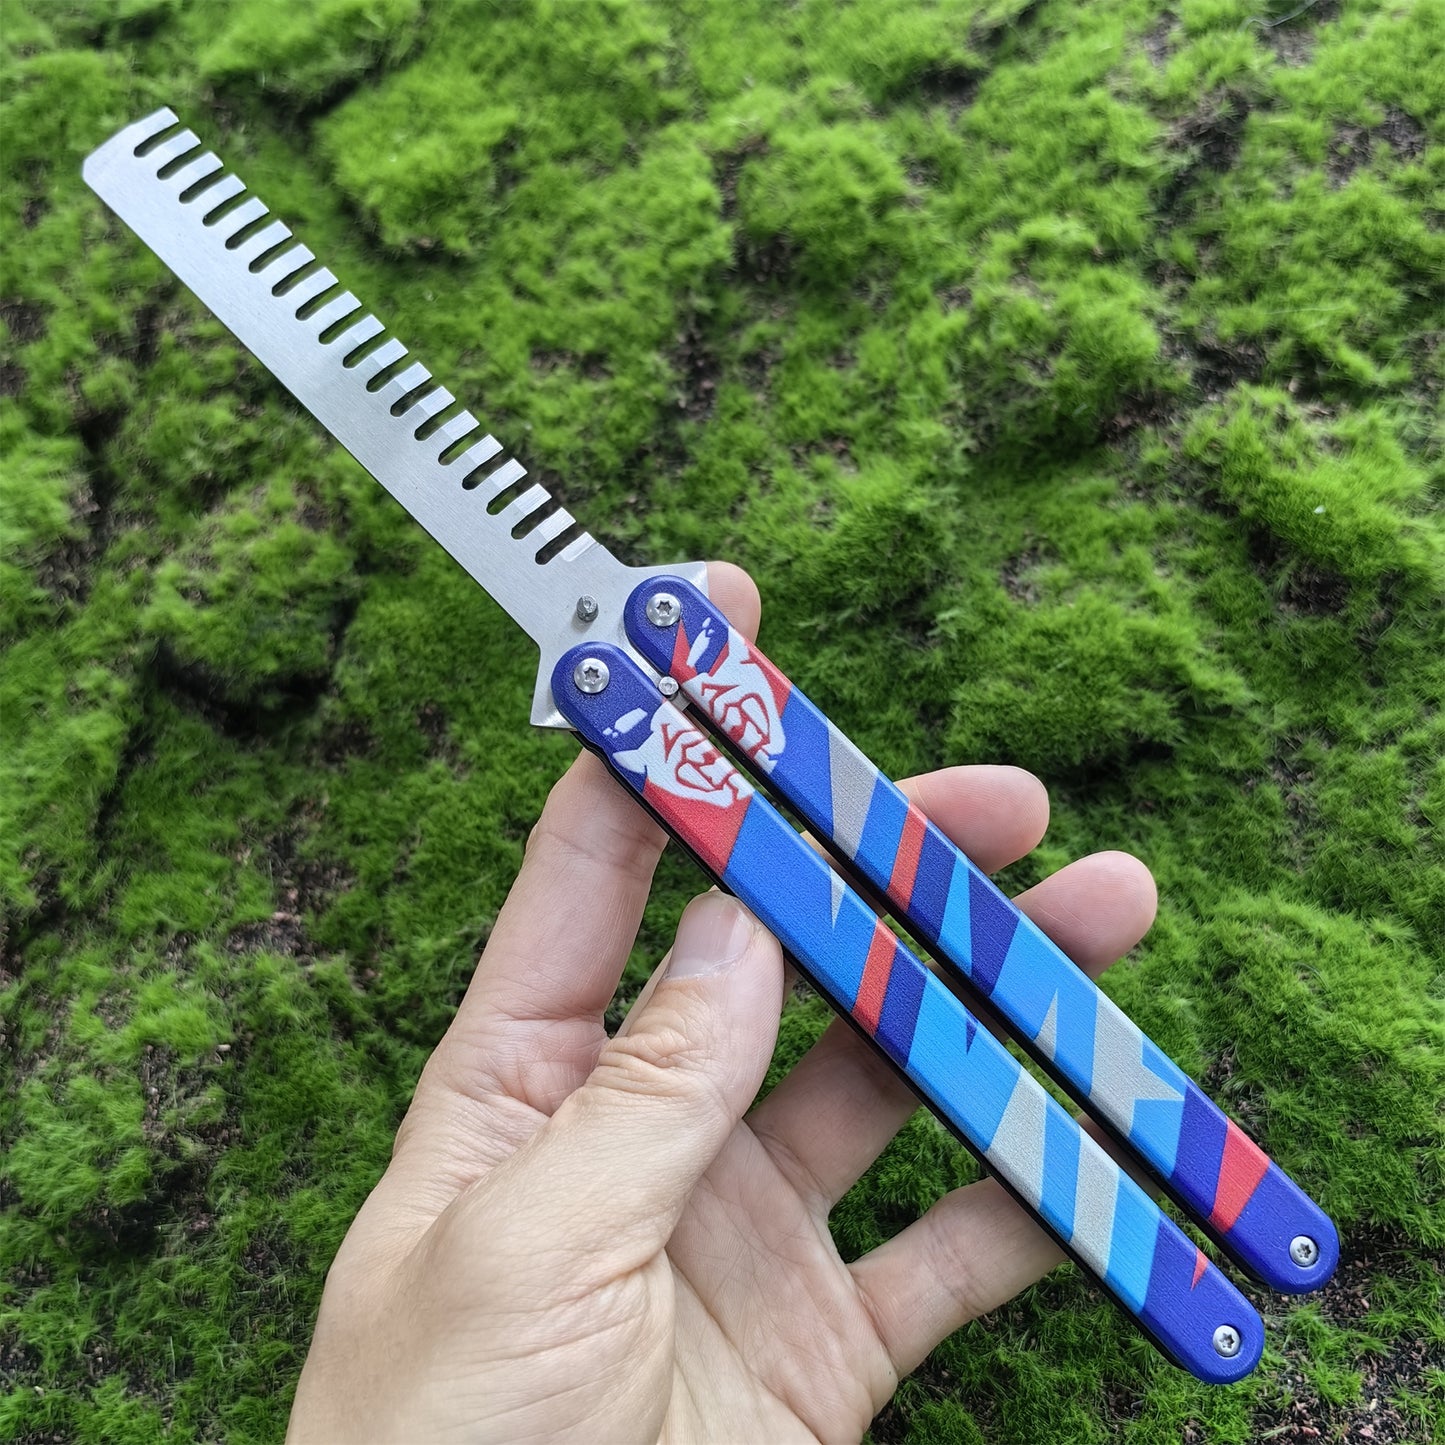 Recon Yoru Comb Champions Blue RGX Balisongs Game Props 4 In 1 Pack